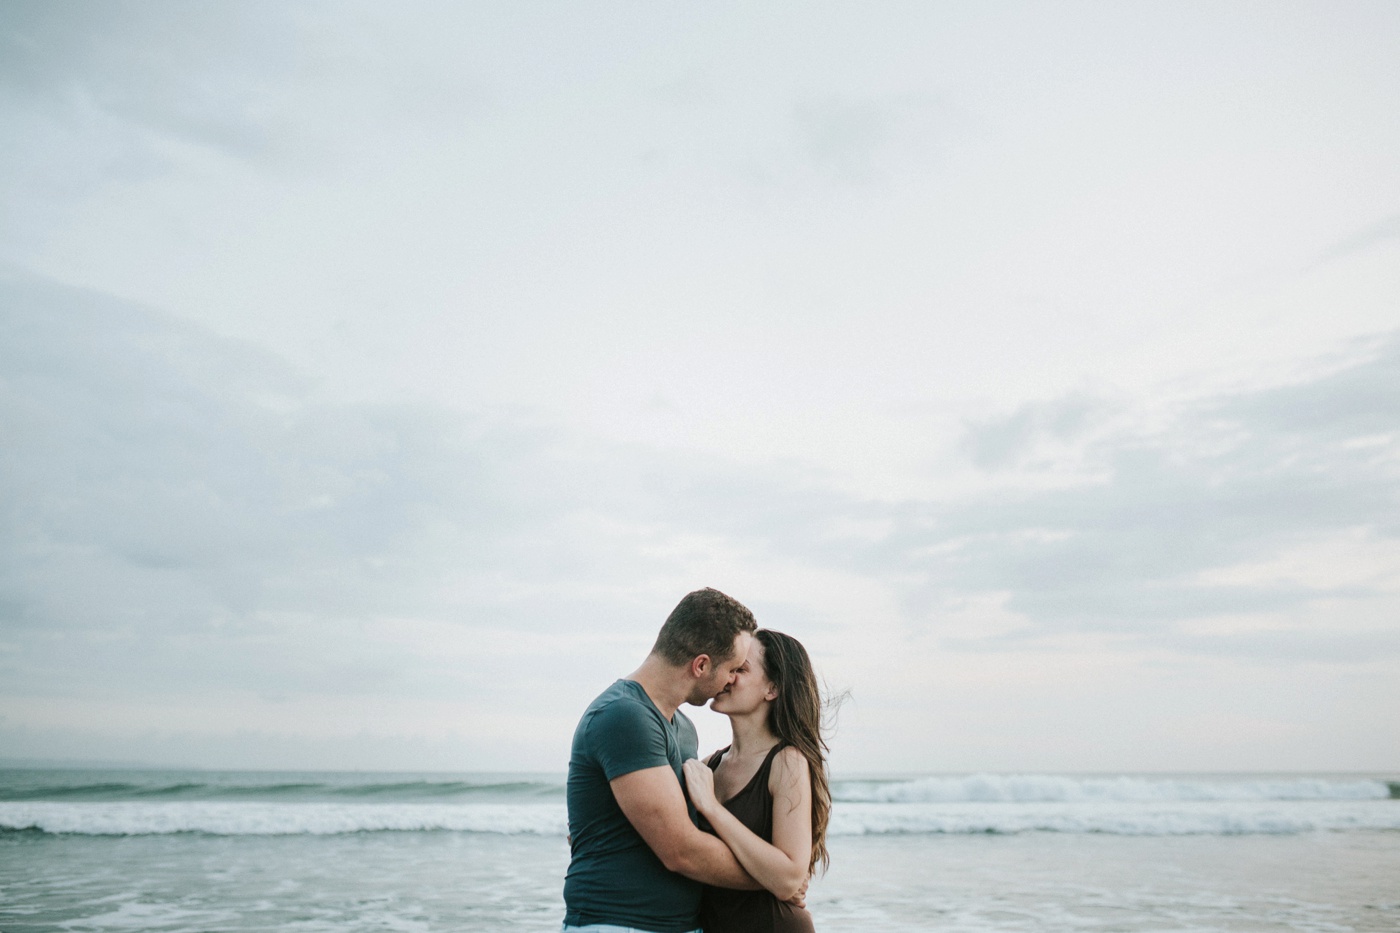 Deb-Ibs_Bali-Beach-Relaxed-Engagement-Session_Destination-Wedding-Photography_Melbourne-Wedding-Photographer_26